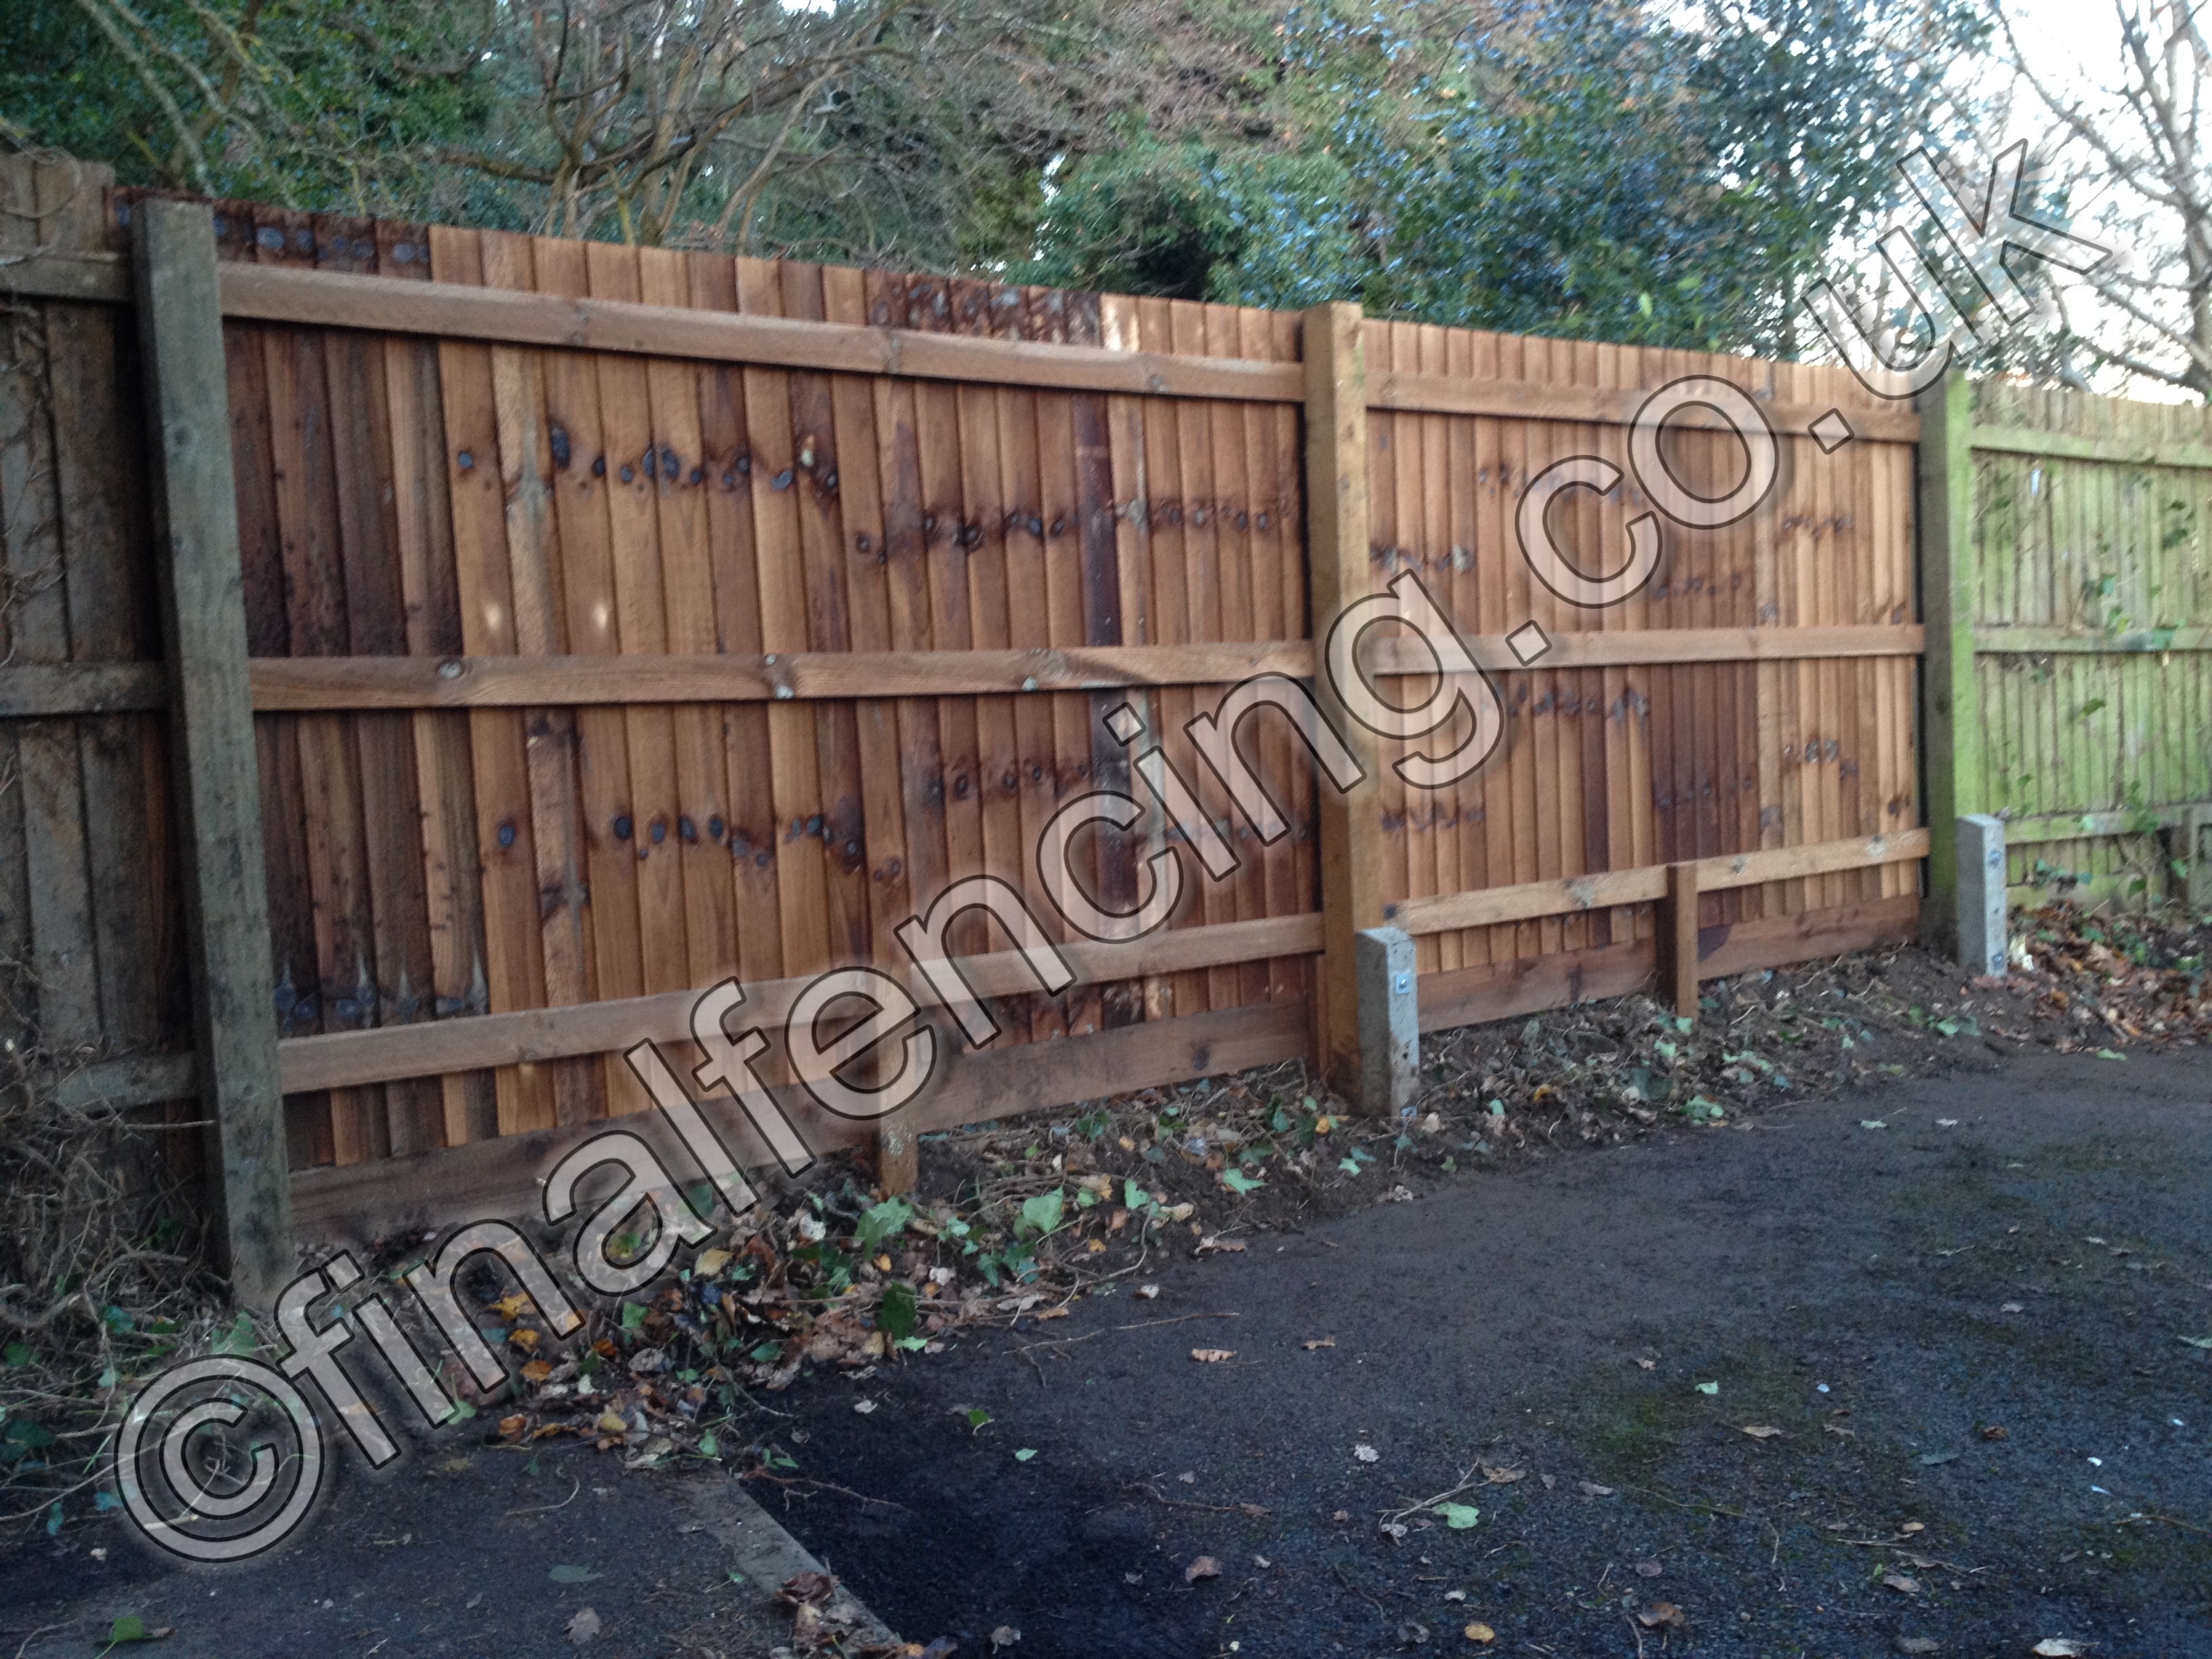 Face fitted rails - to match existing fence